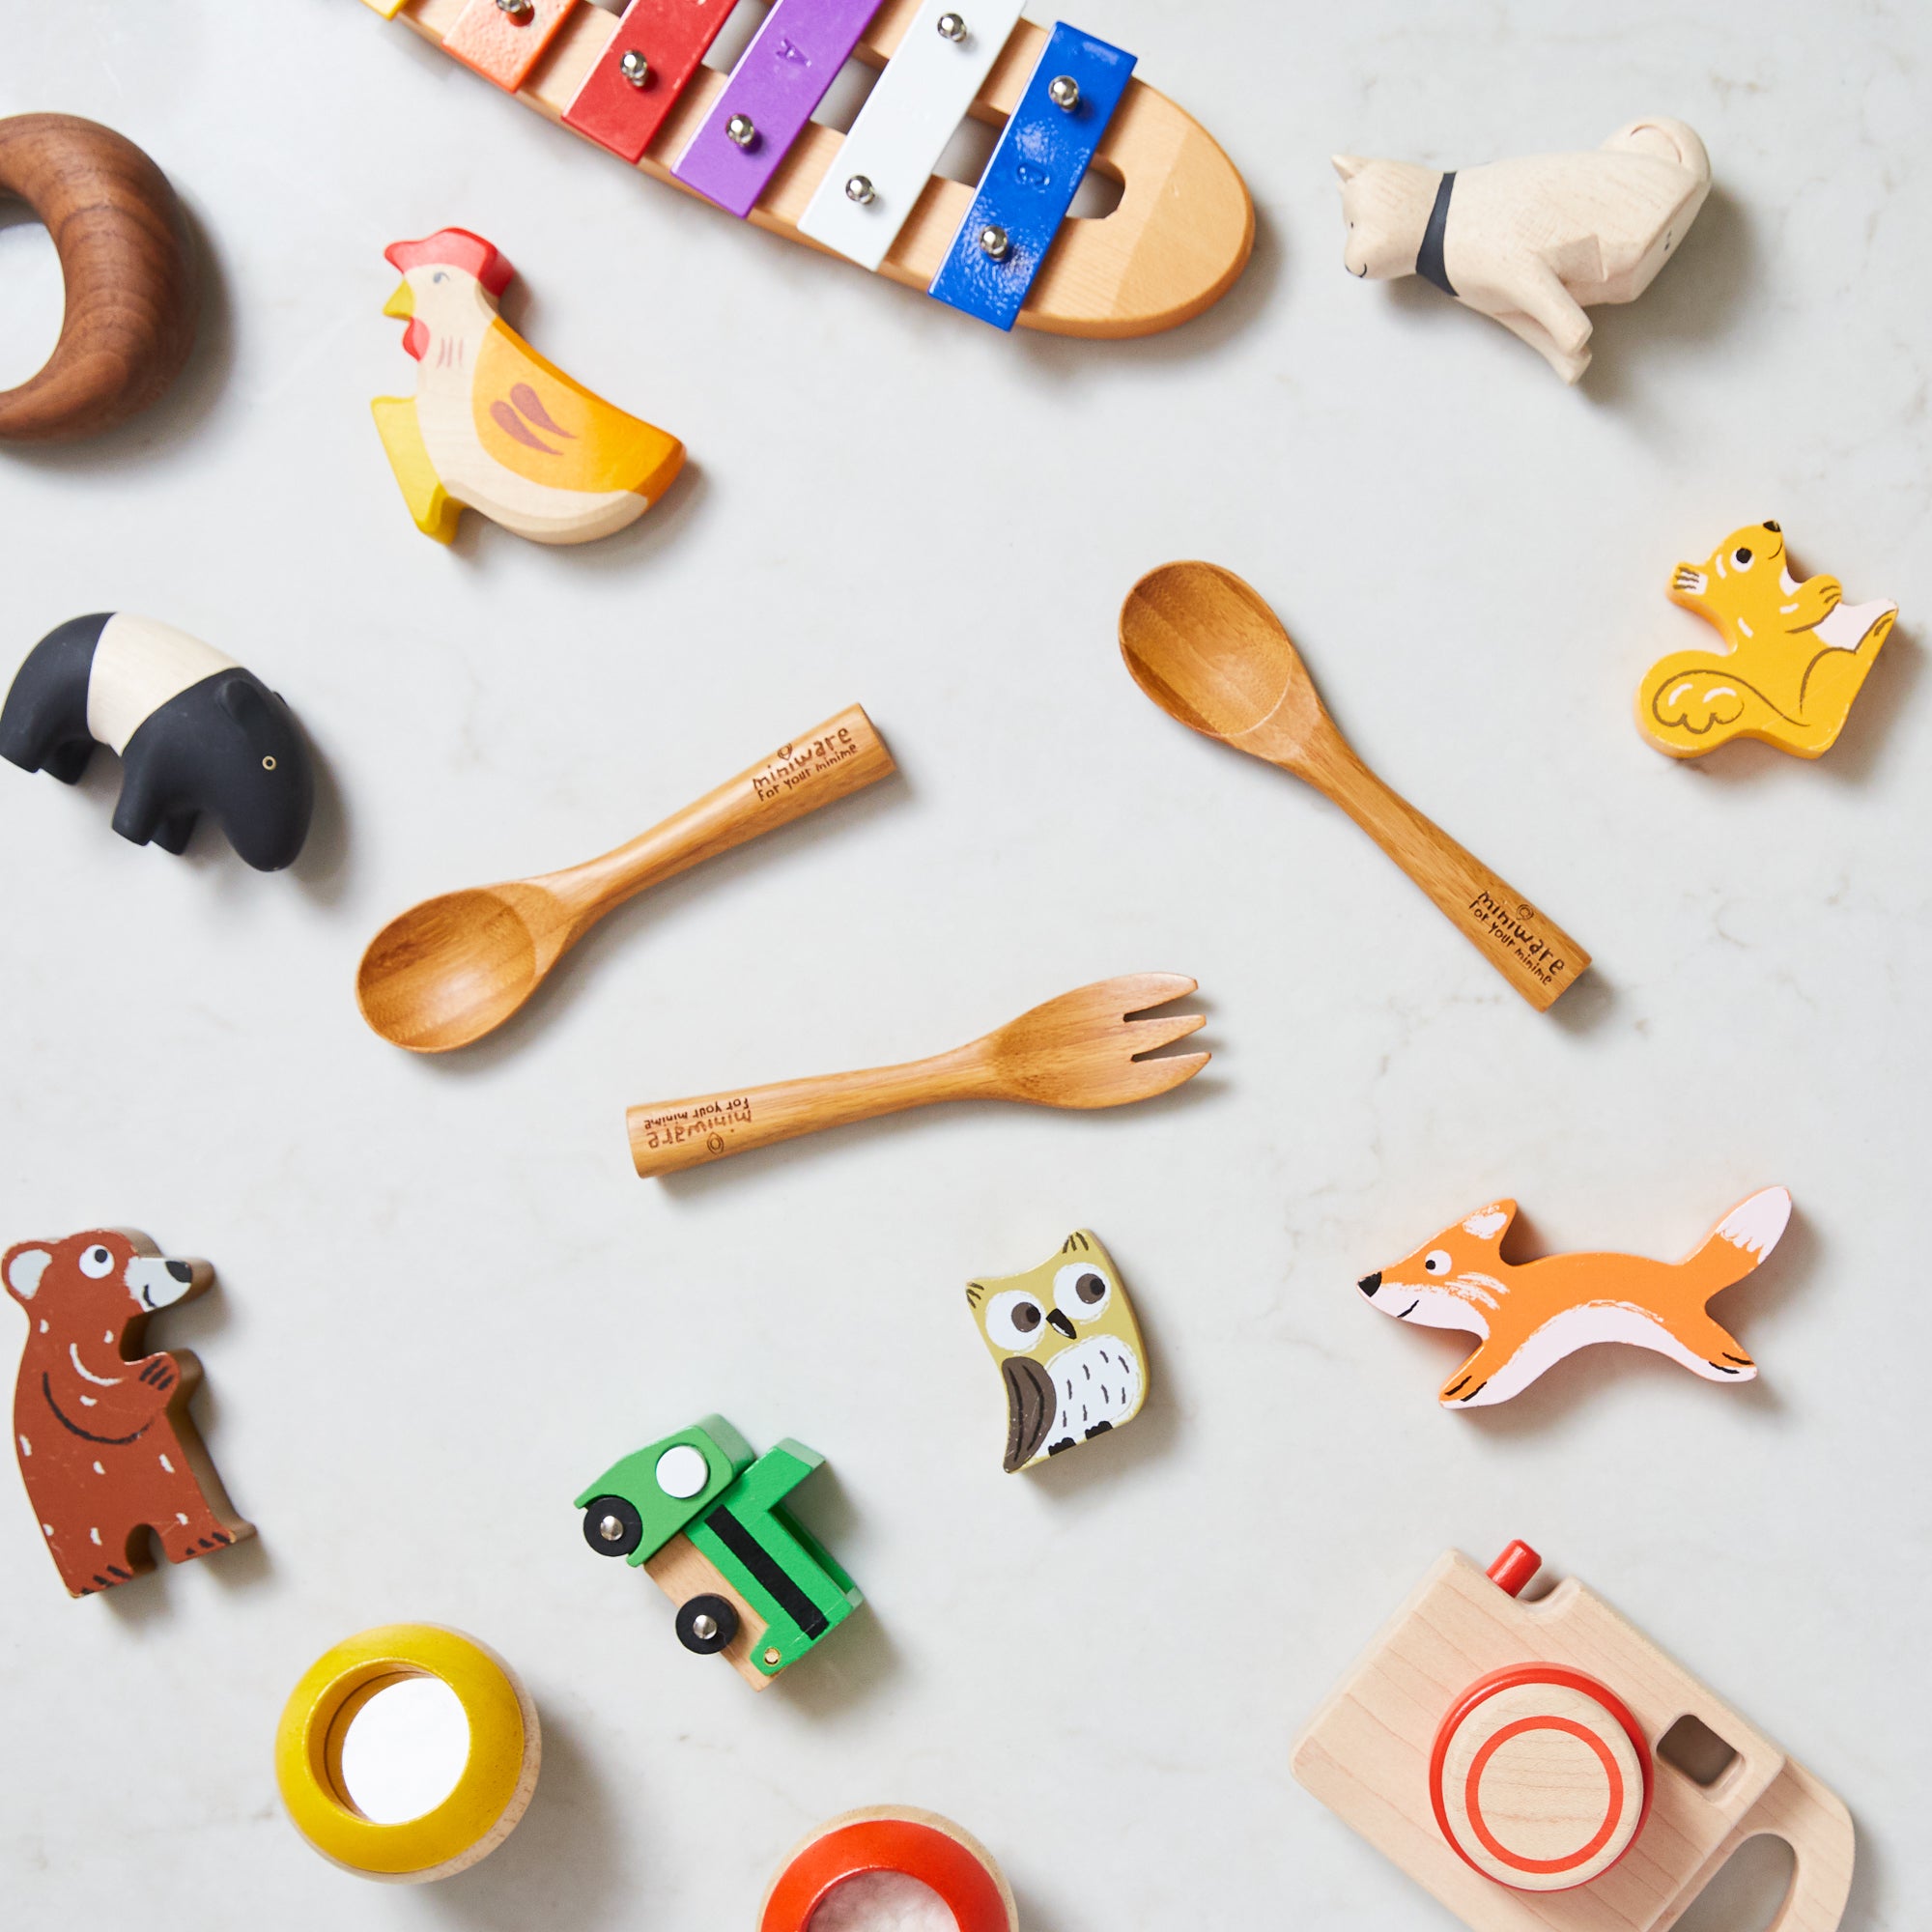 Miniware and toys displayed for meaningful gifts for new parents